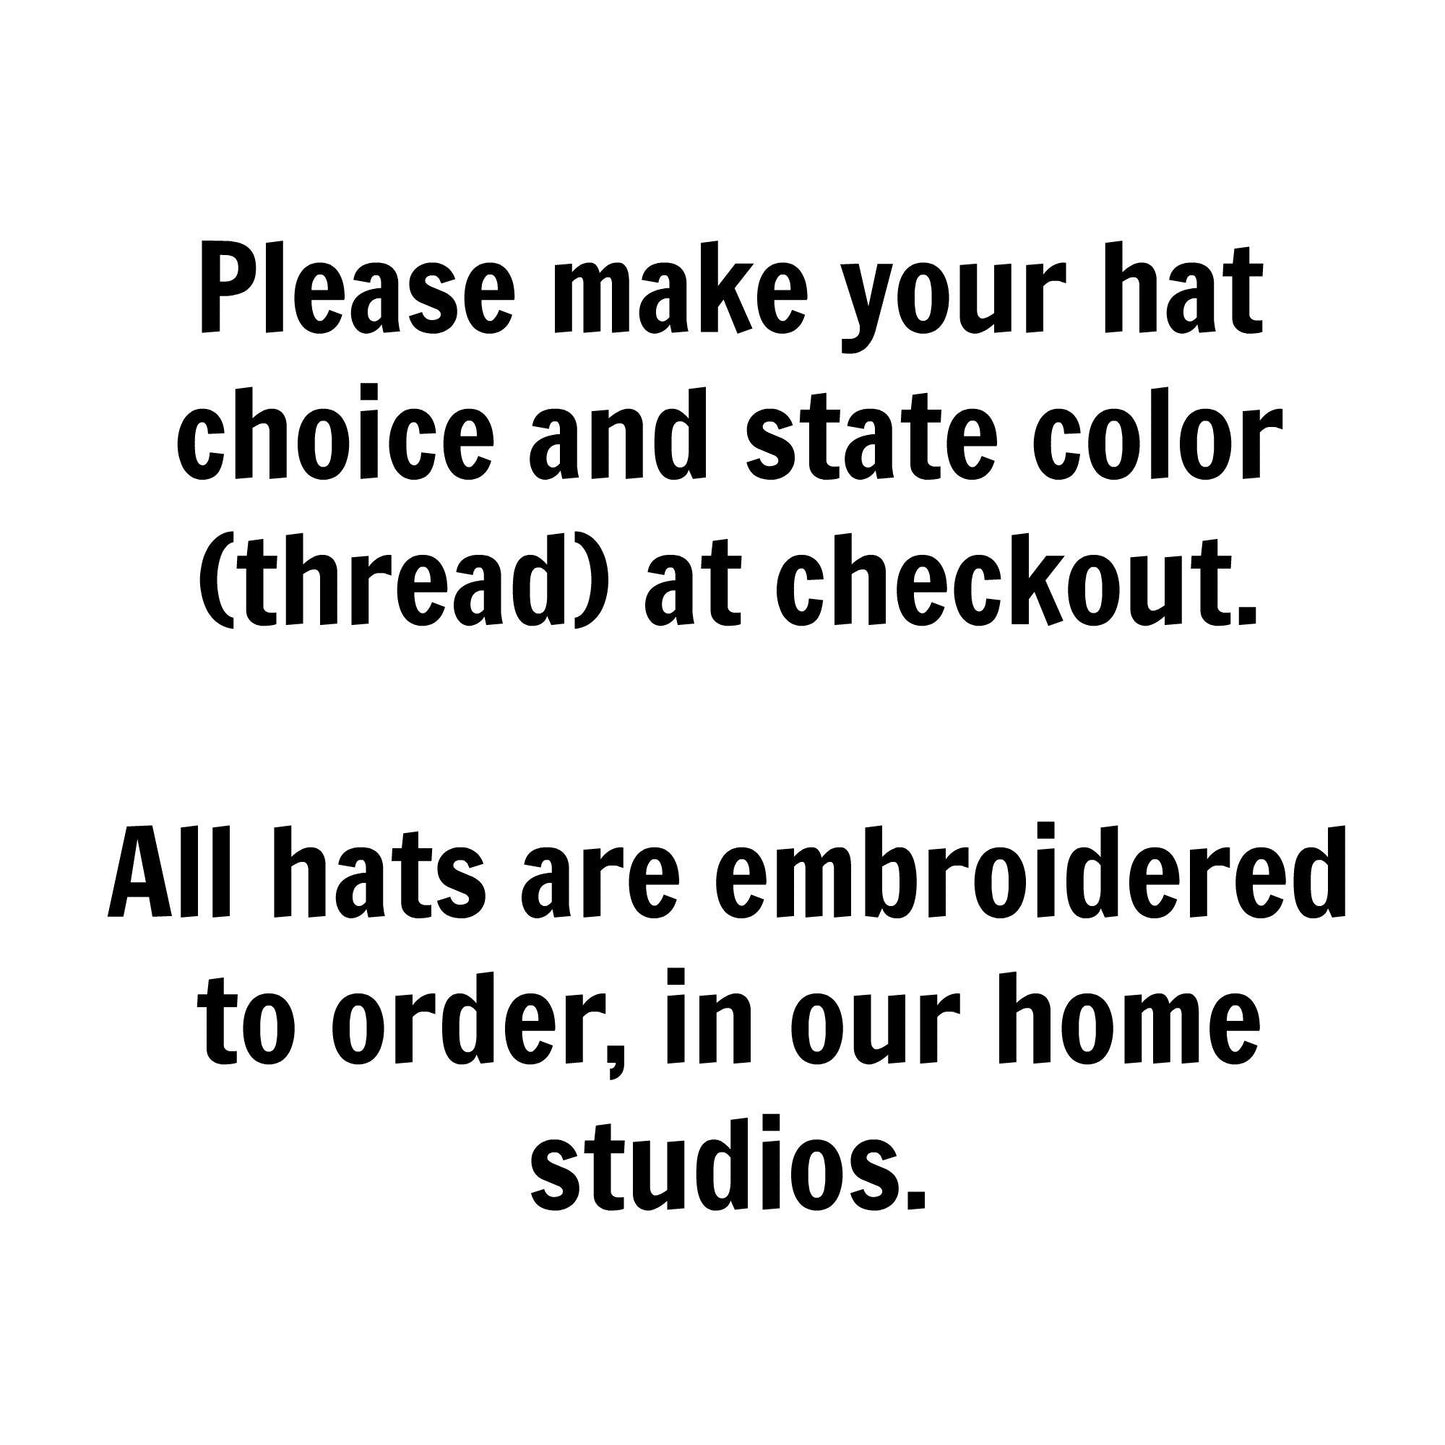 Pennsylvania Hat - Classic Dad Hat - Many Color Combinations